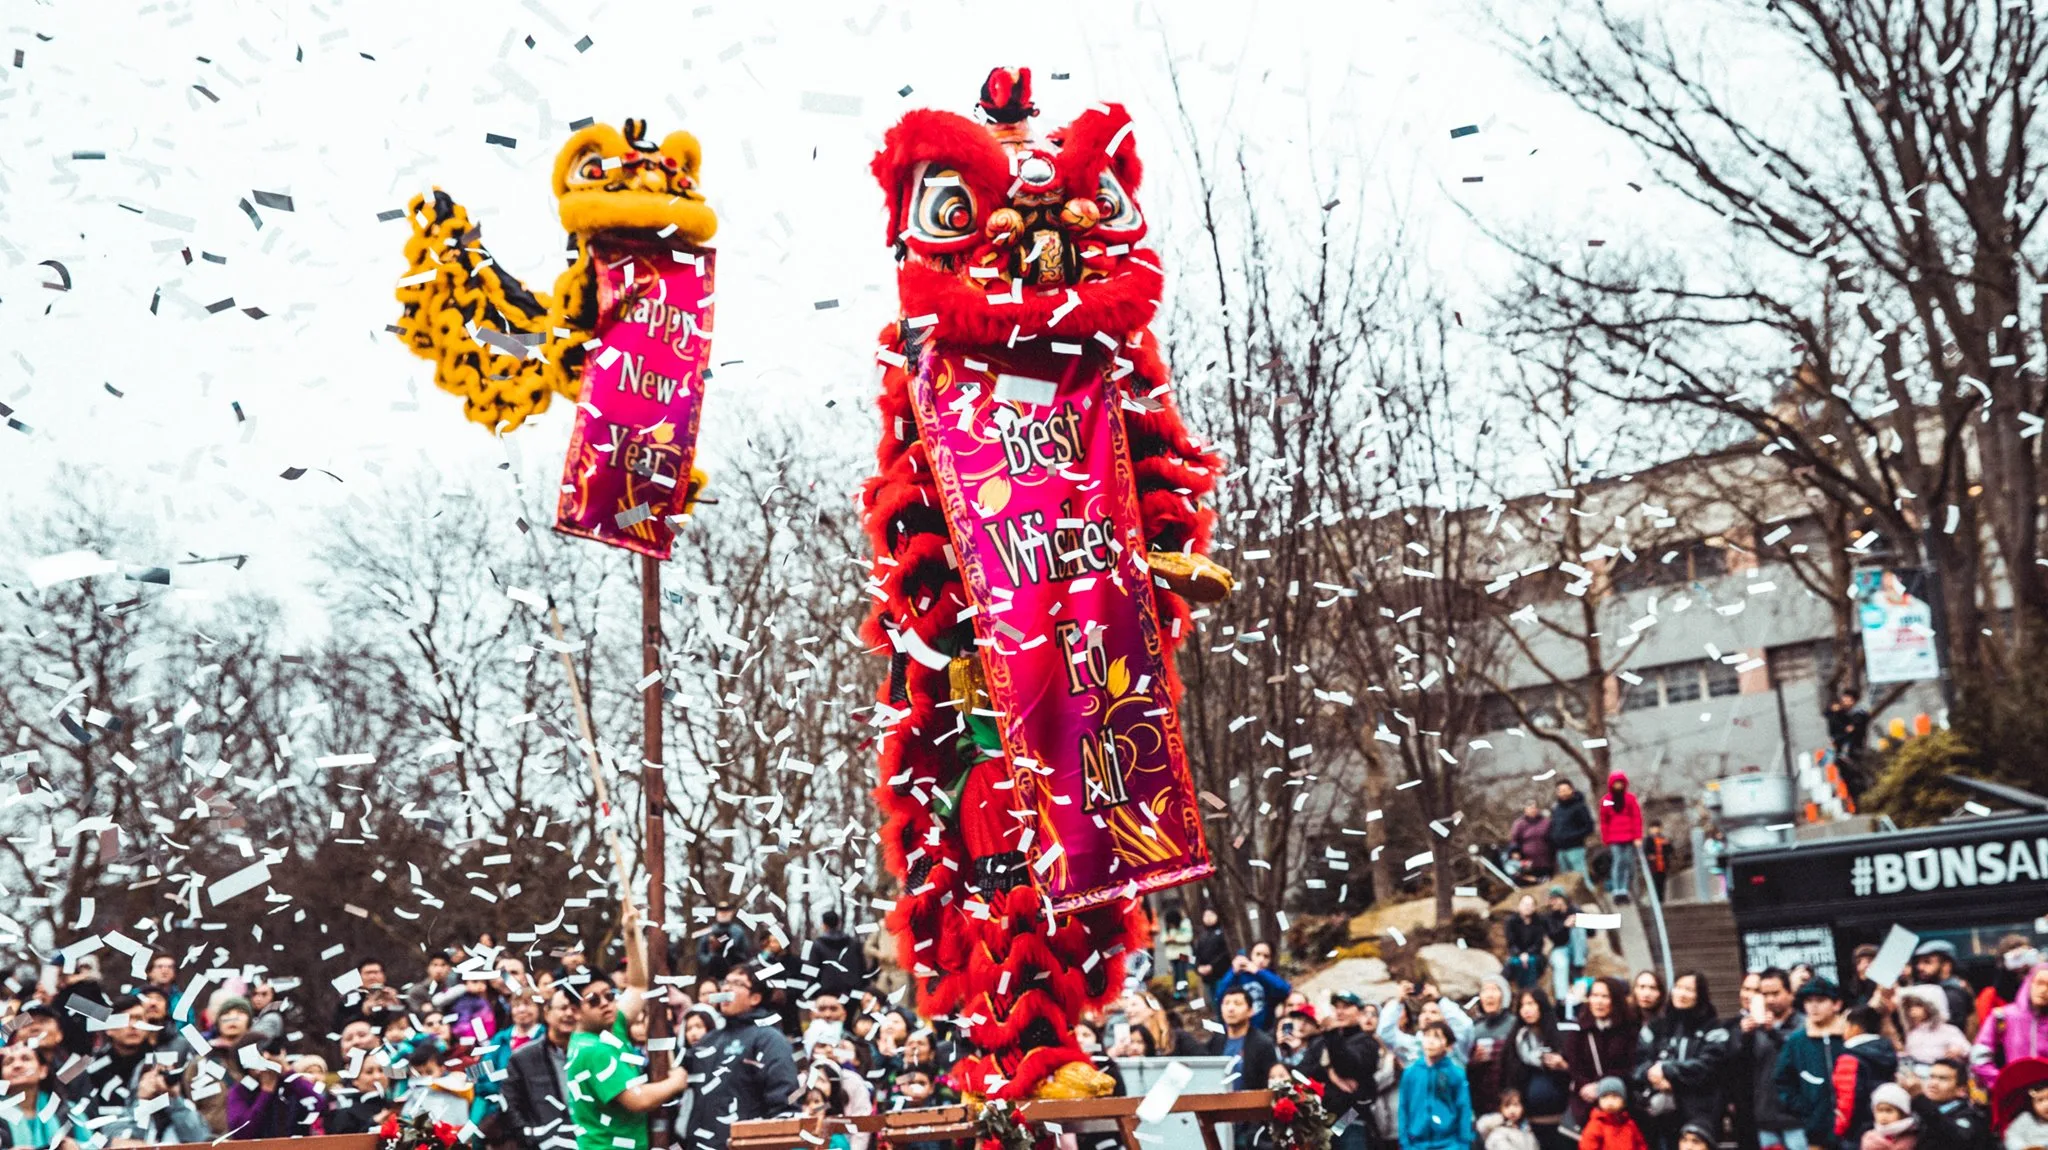 A crowd of people gather in Seattle Center for Vietnamese Lunar New Year. Lion puppets are raised above